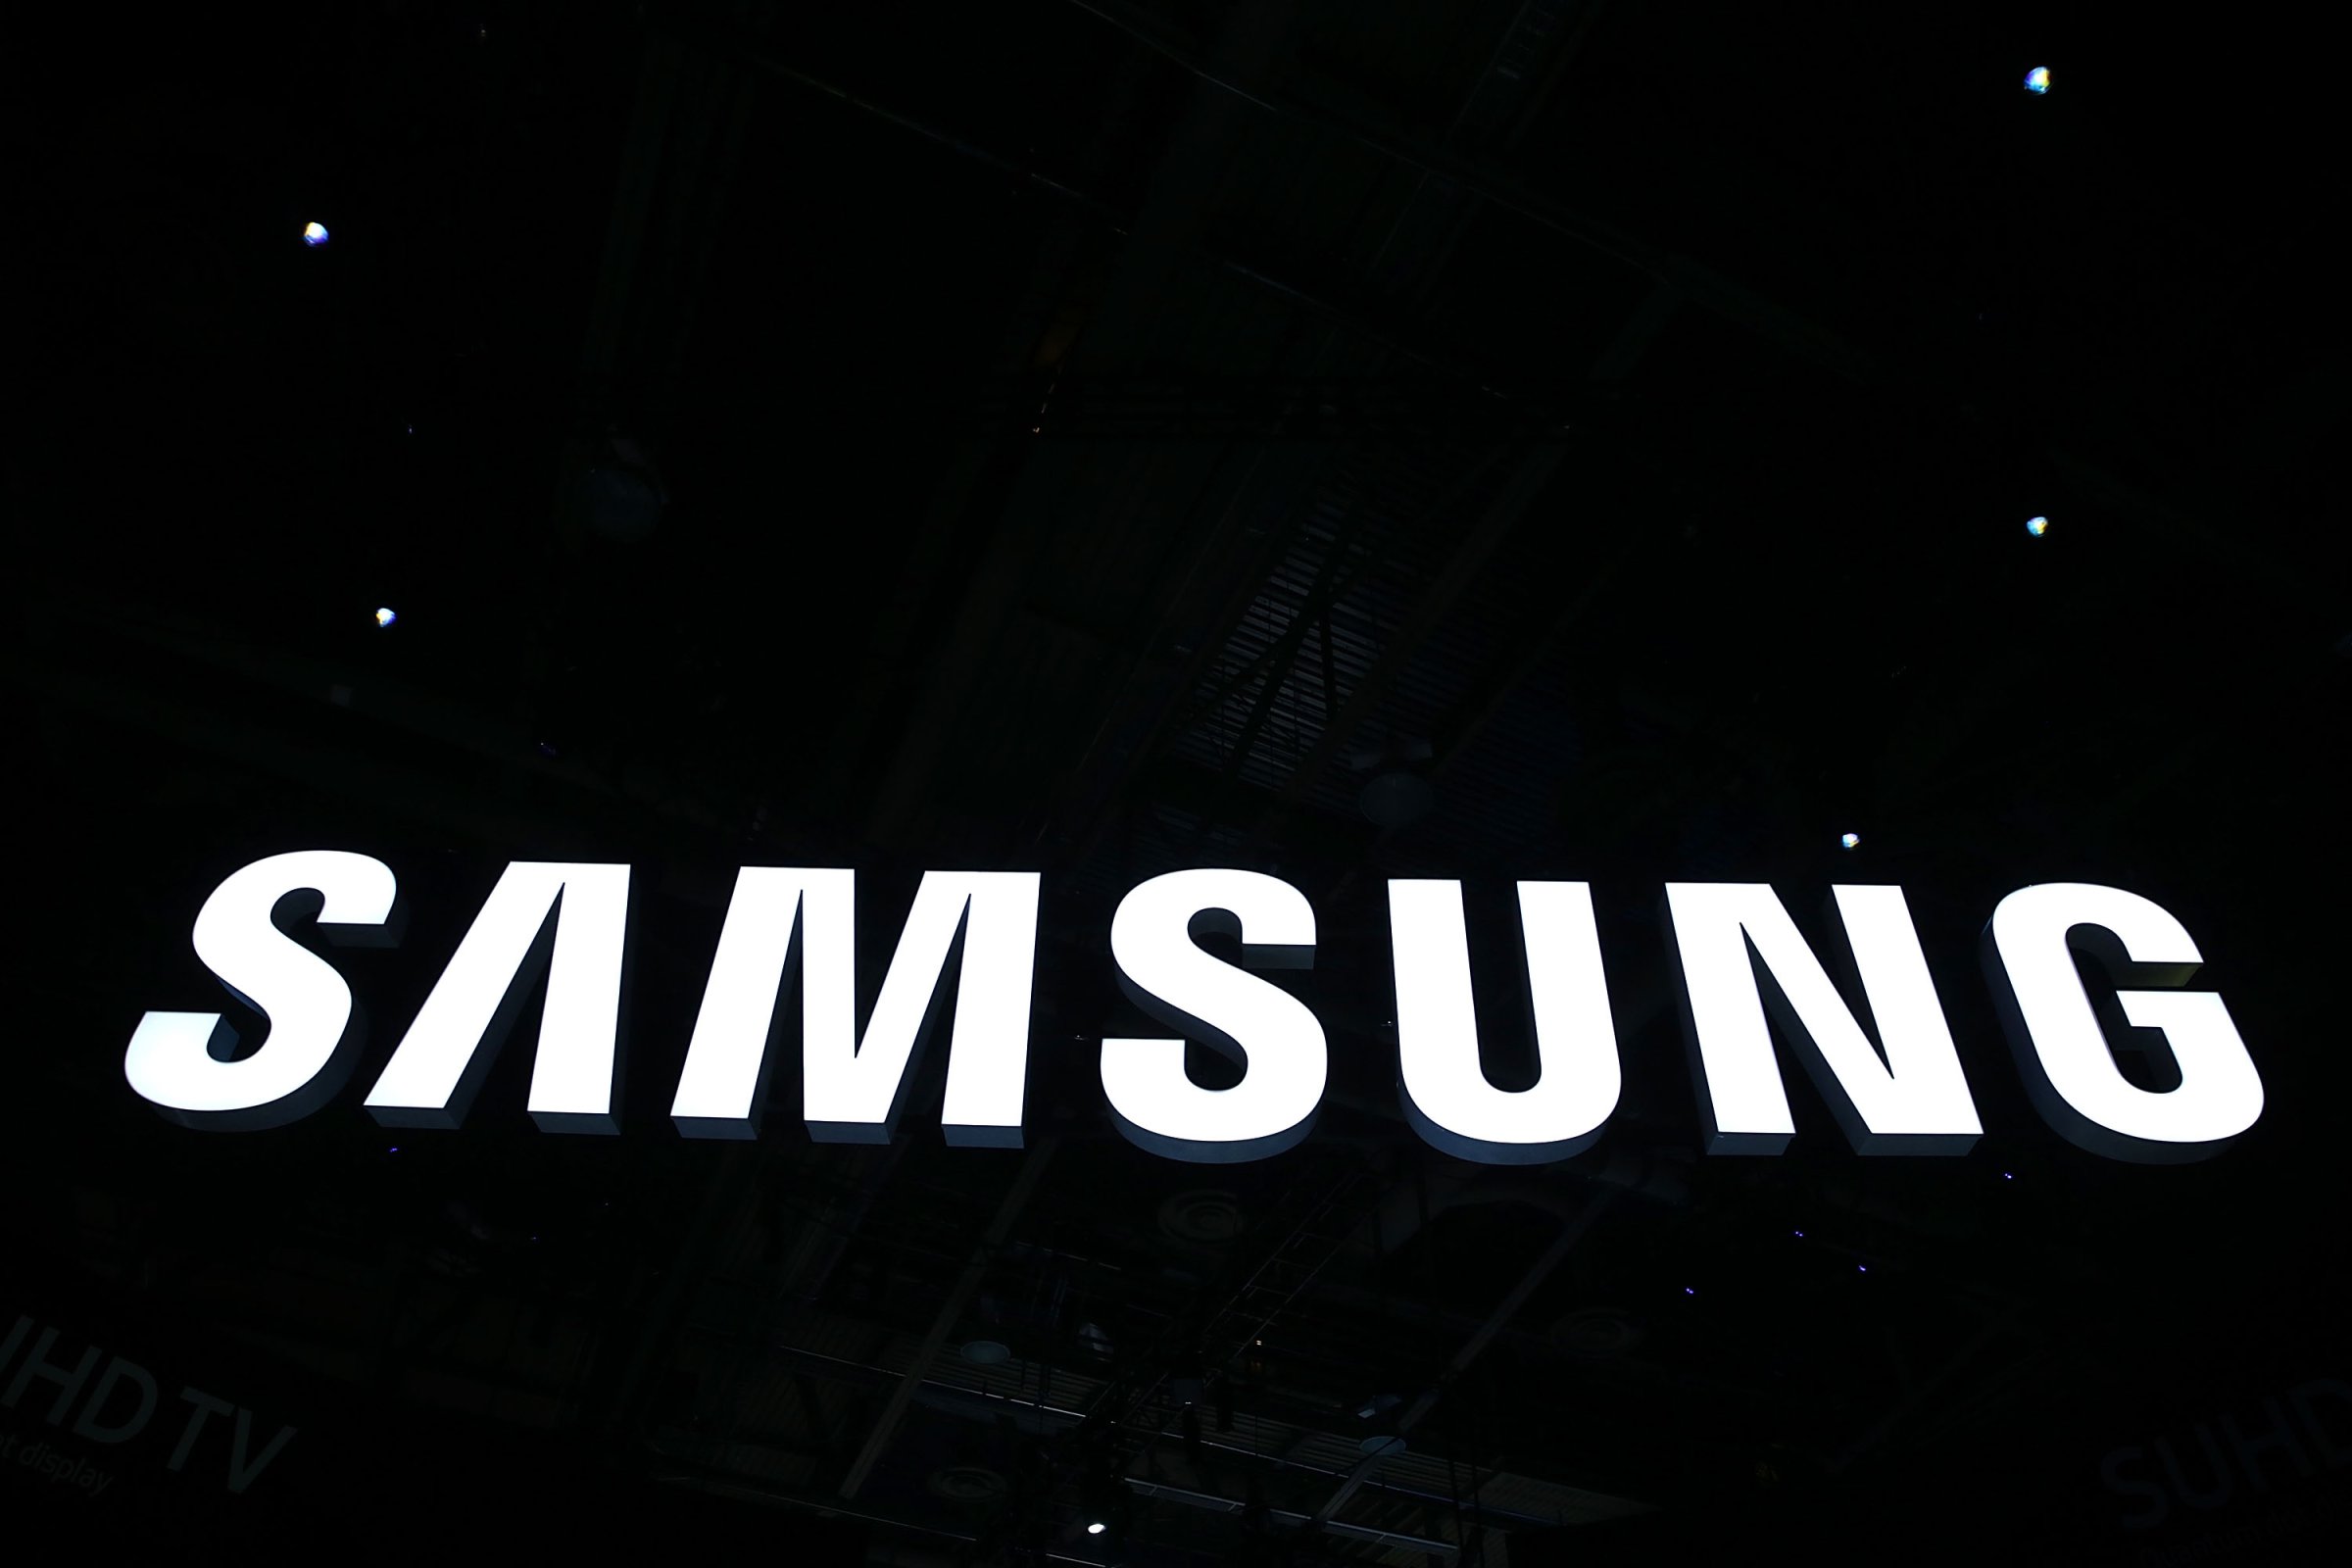 The Samsung logo is seen at CES 2016 at the Las Vegas Convention Center on January 6, 2016 in Las Vegas, Nevada.